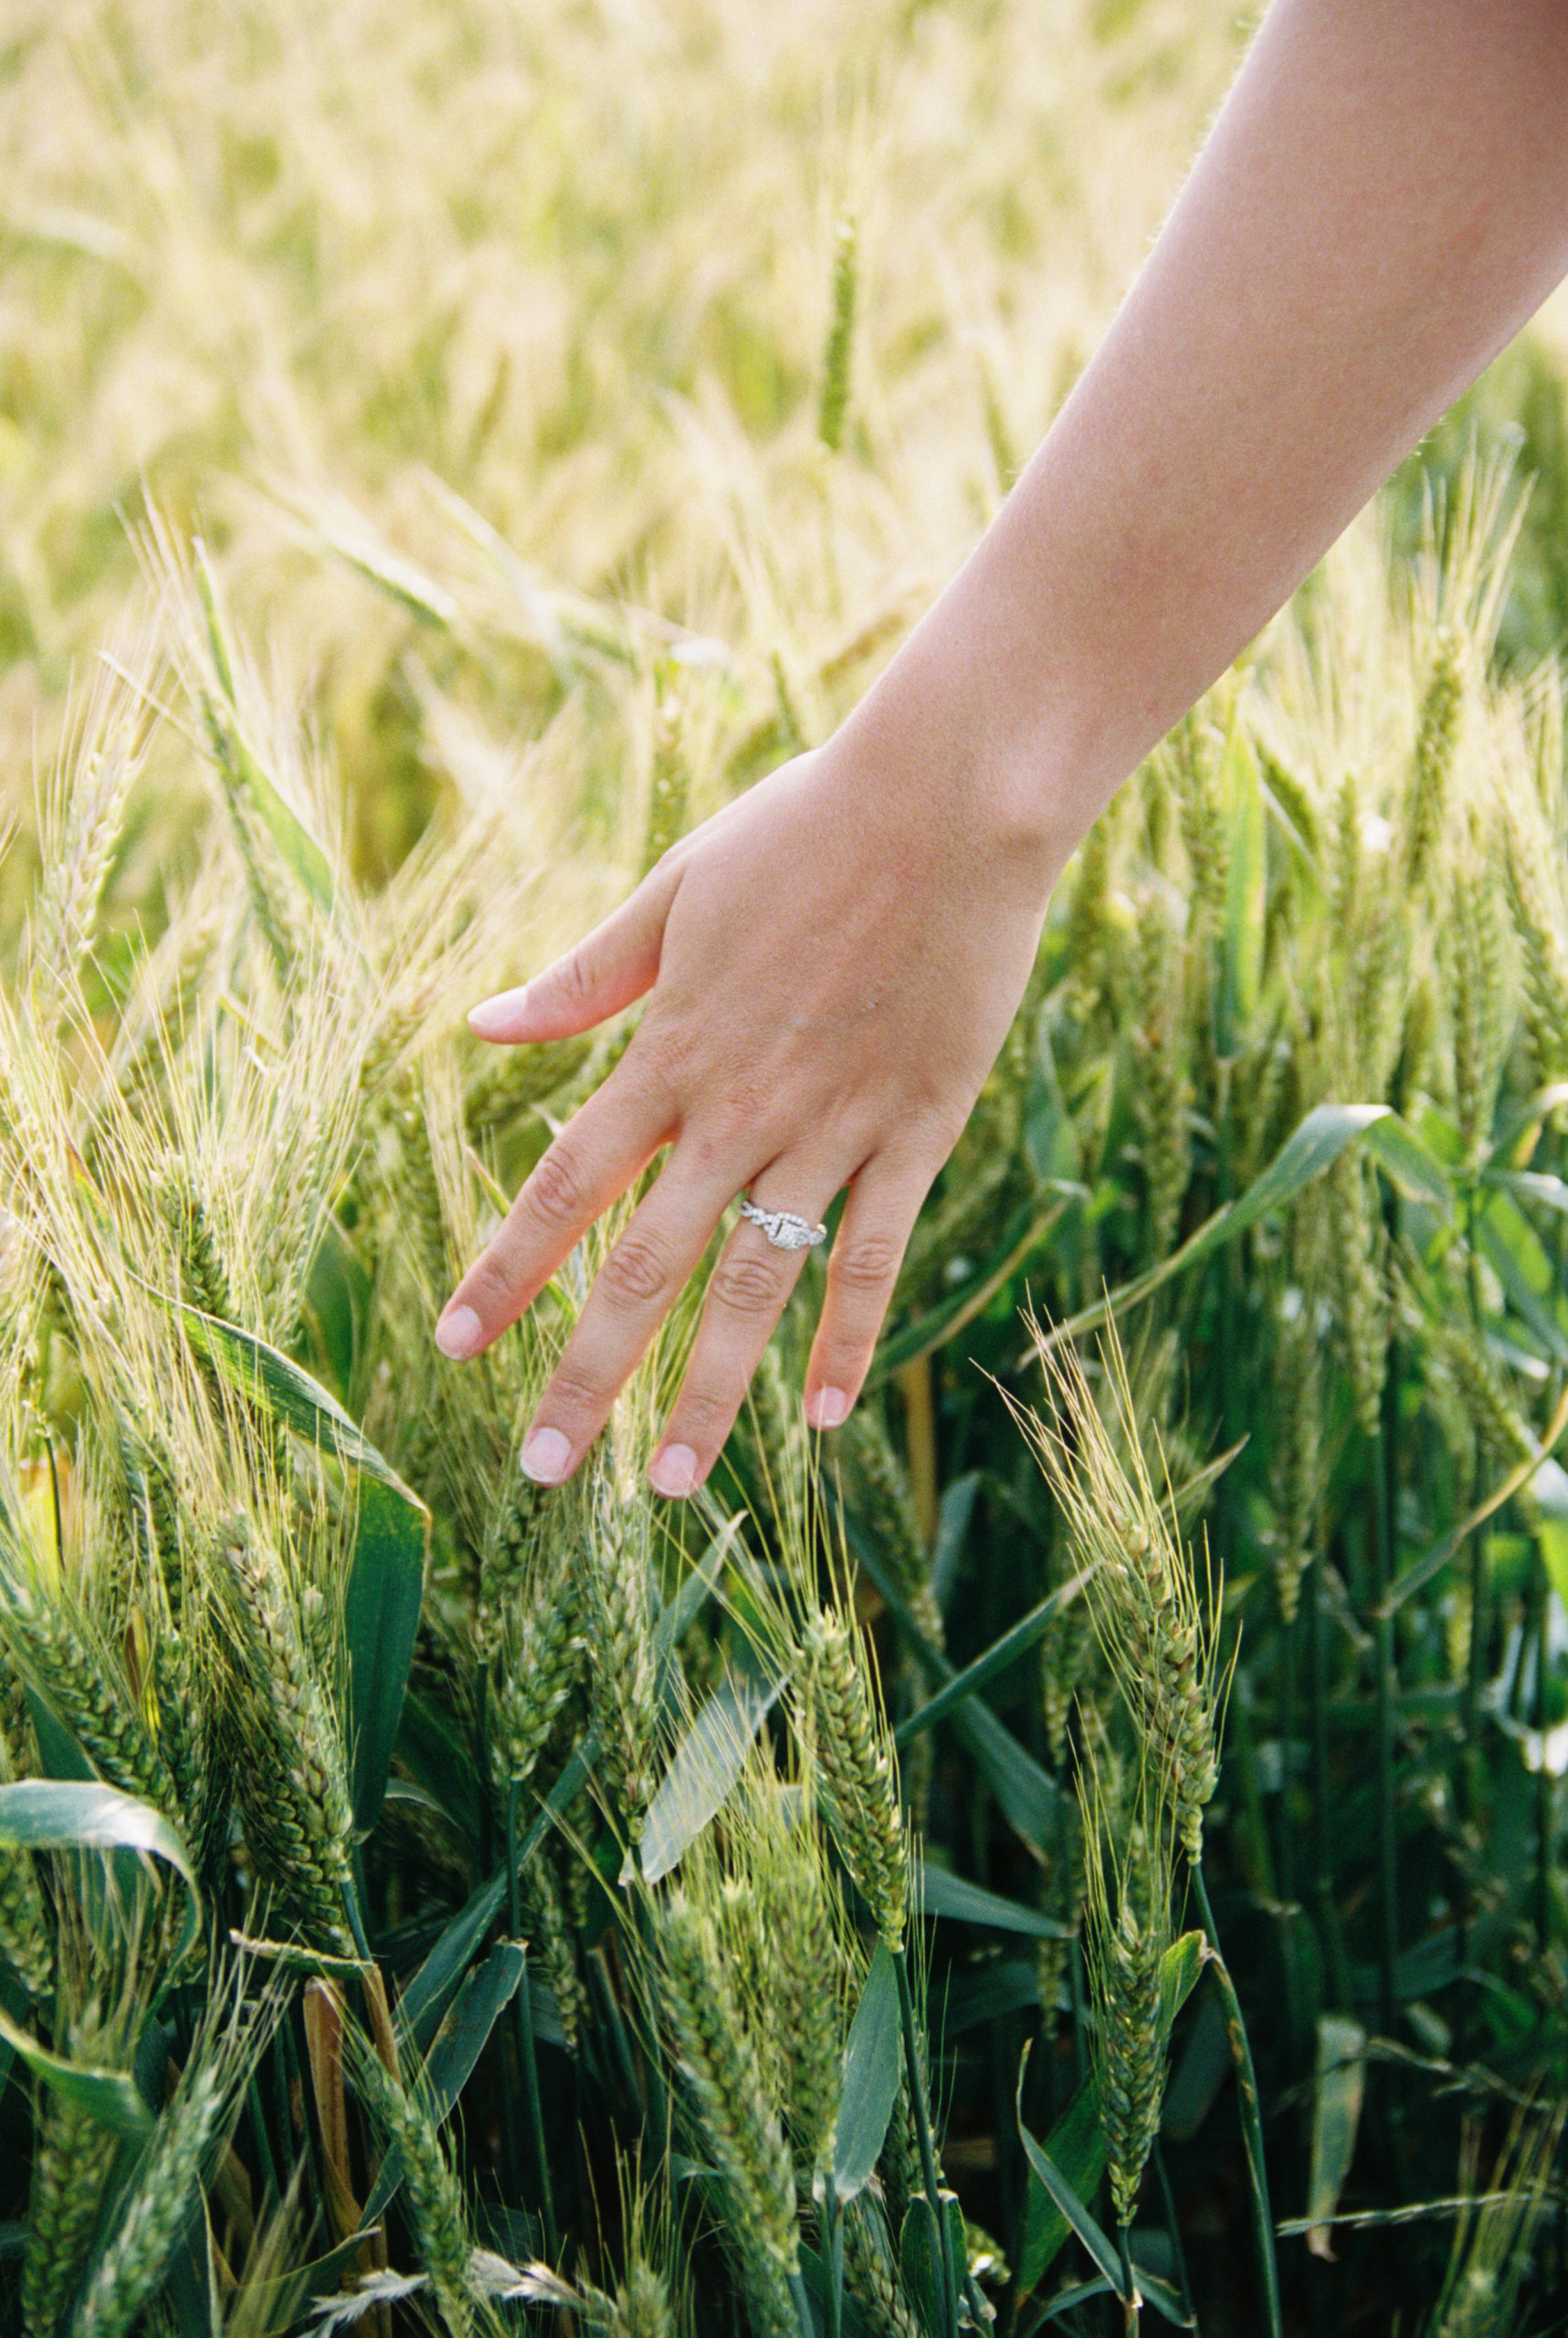 Kat drags her left hand through the wheat field, while showing off her ring